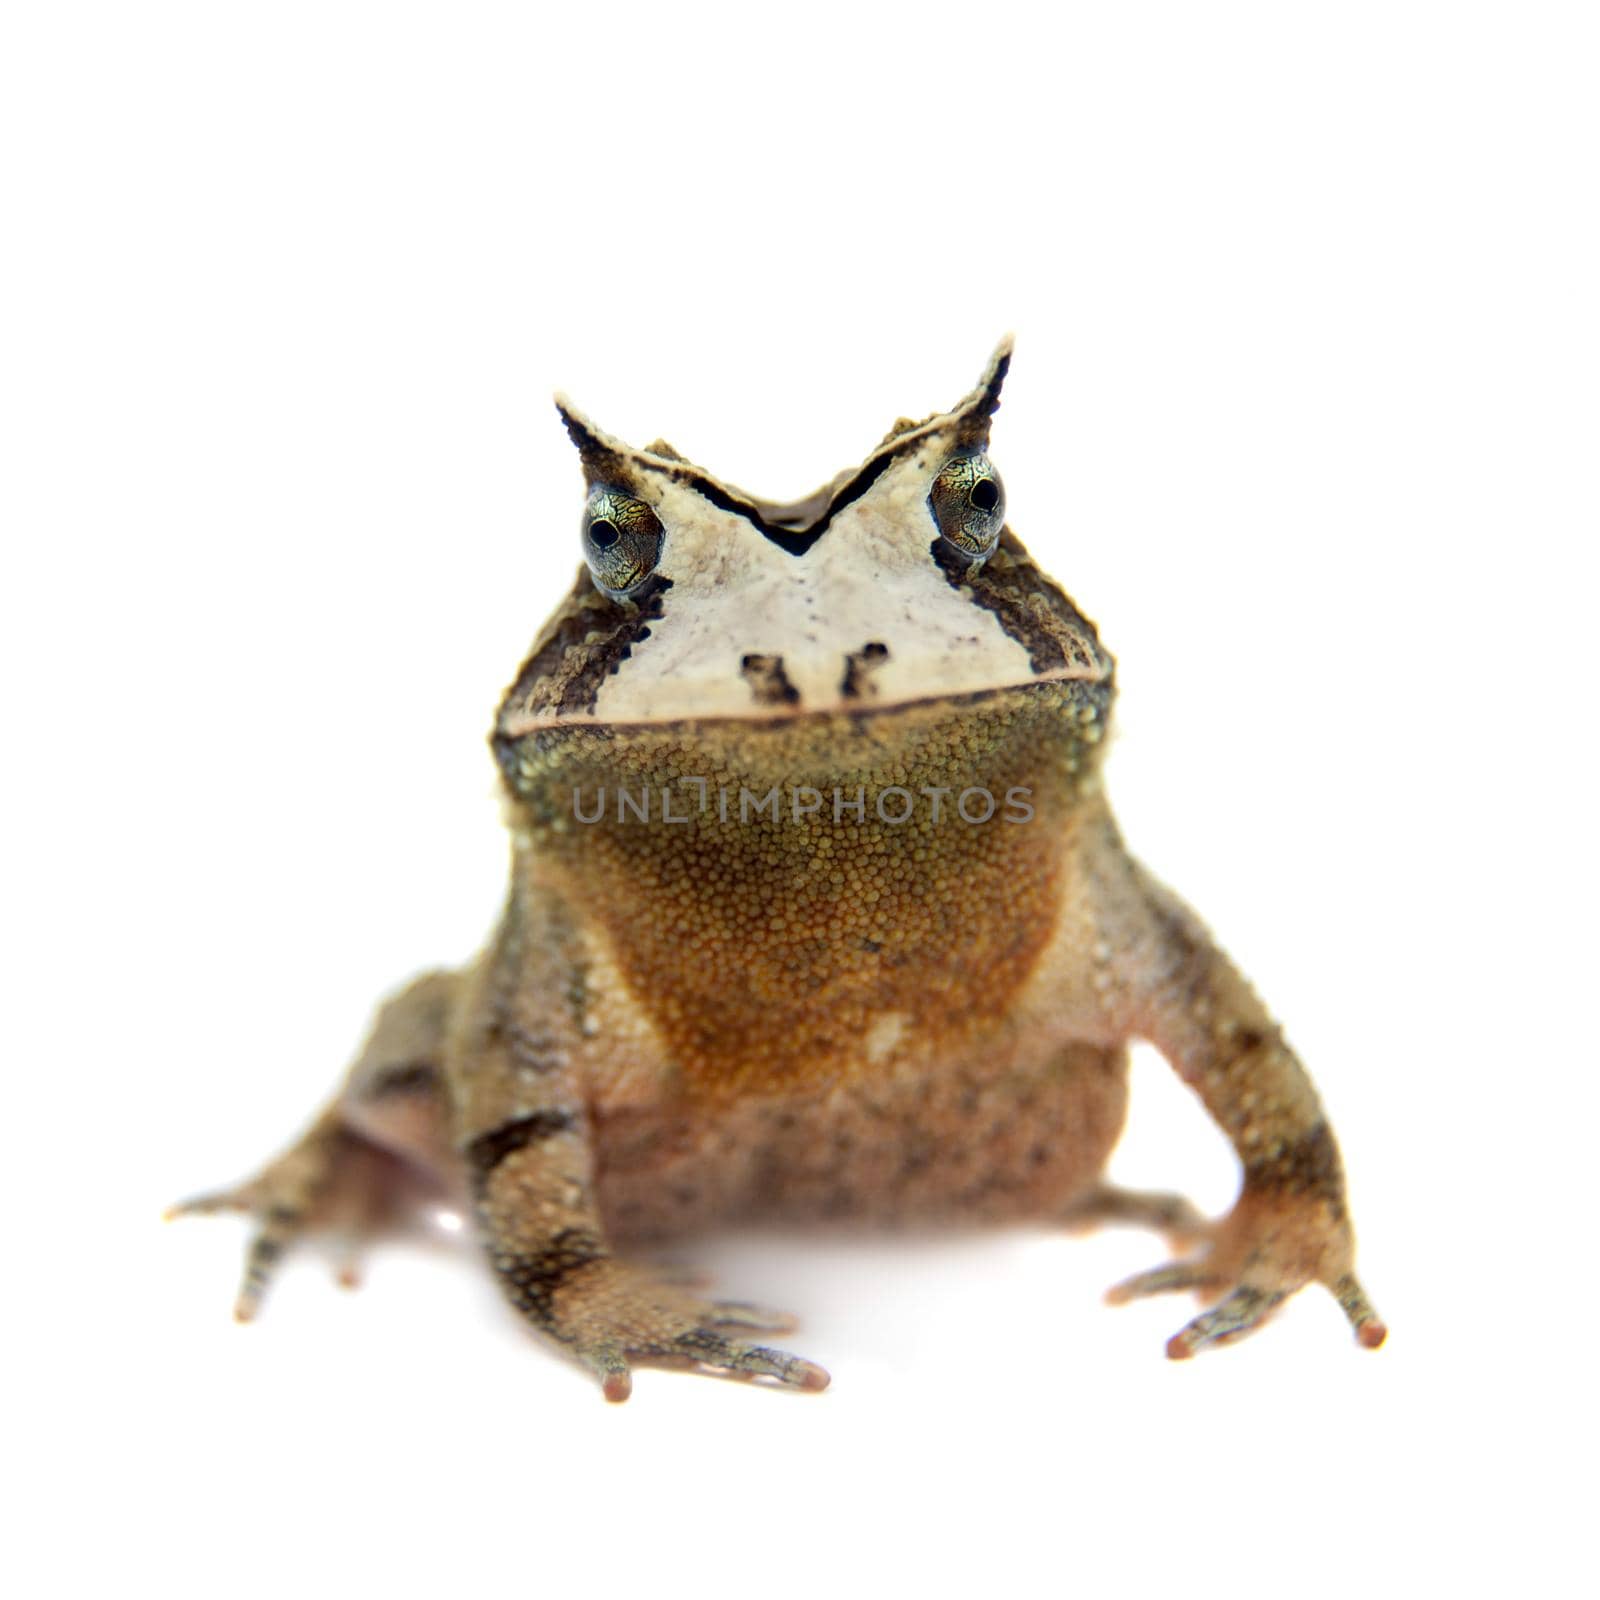 Cerrado toad, Proceratophrys boiei, isolated on white background